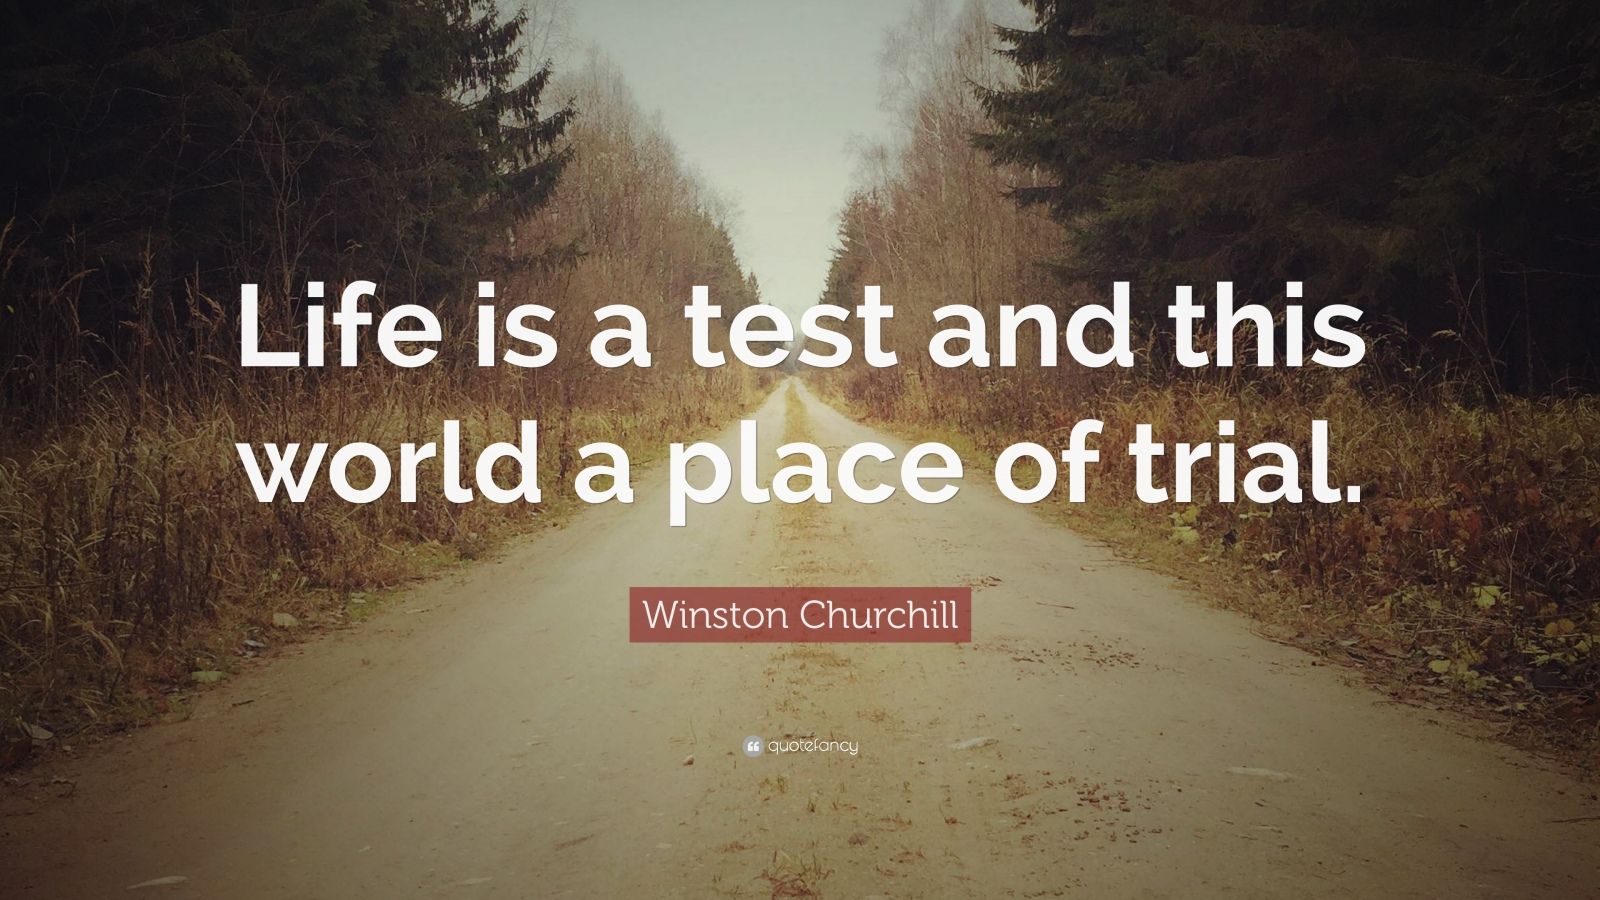 Winston Churchill Quote: “Life is a test and this world a place of trial.”